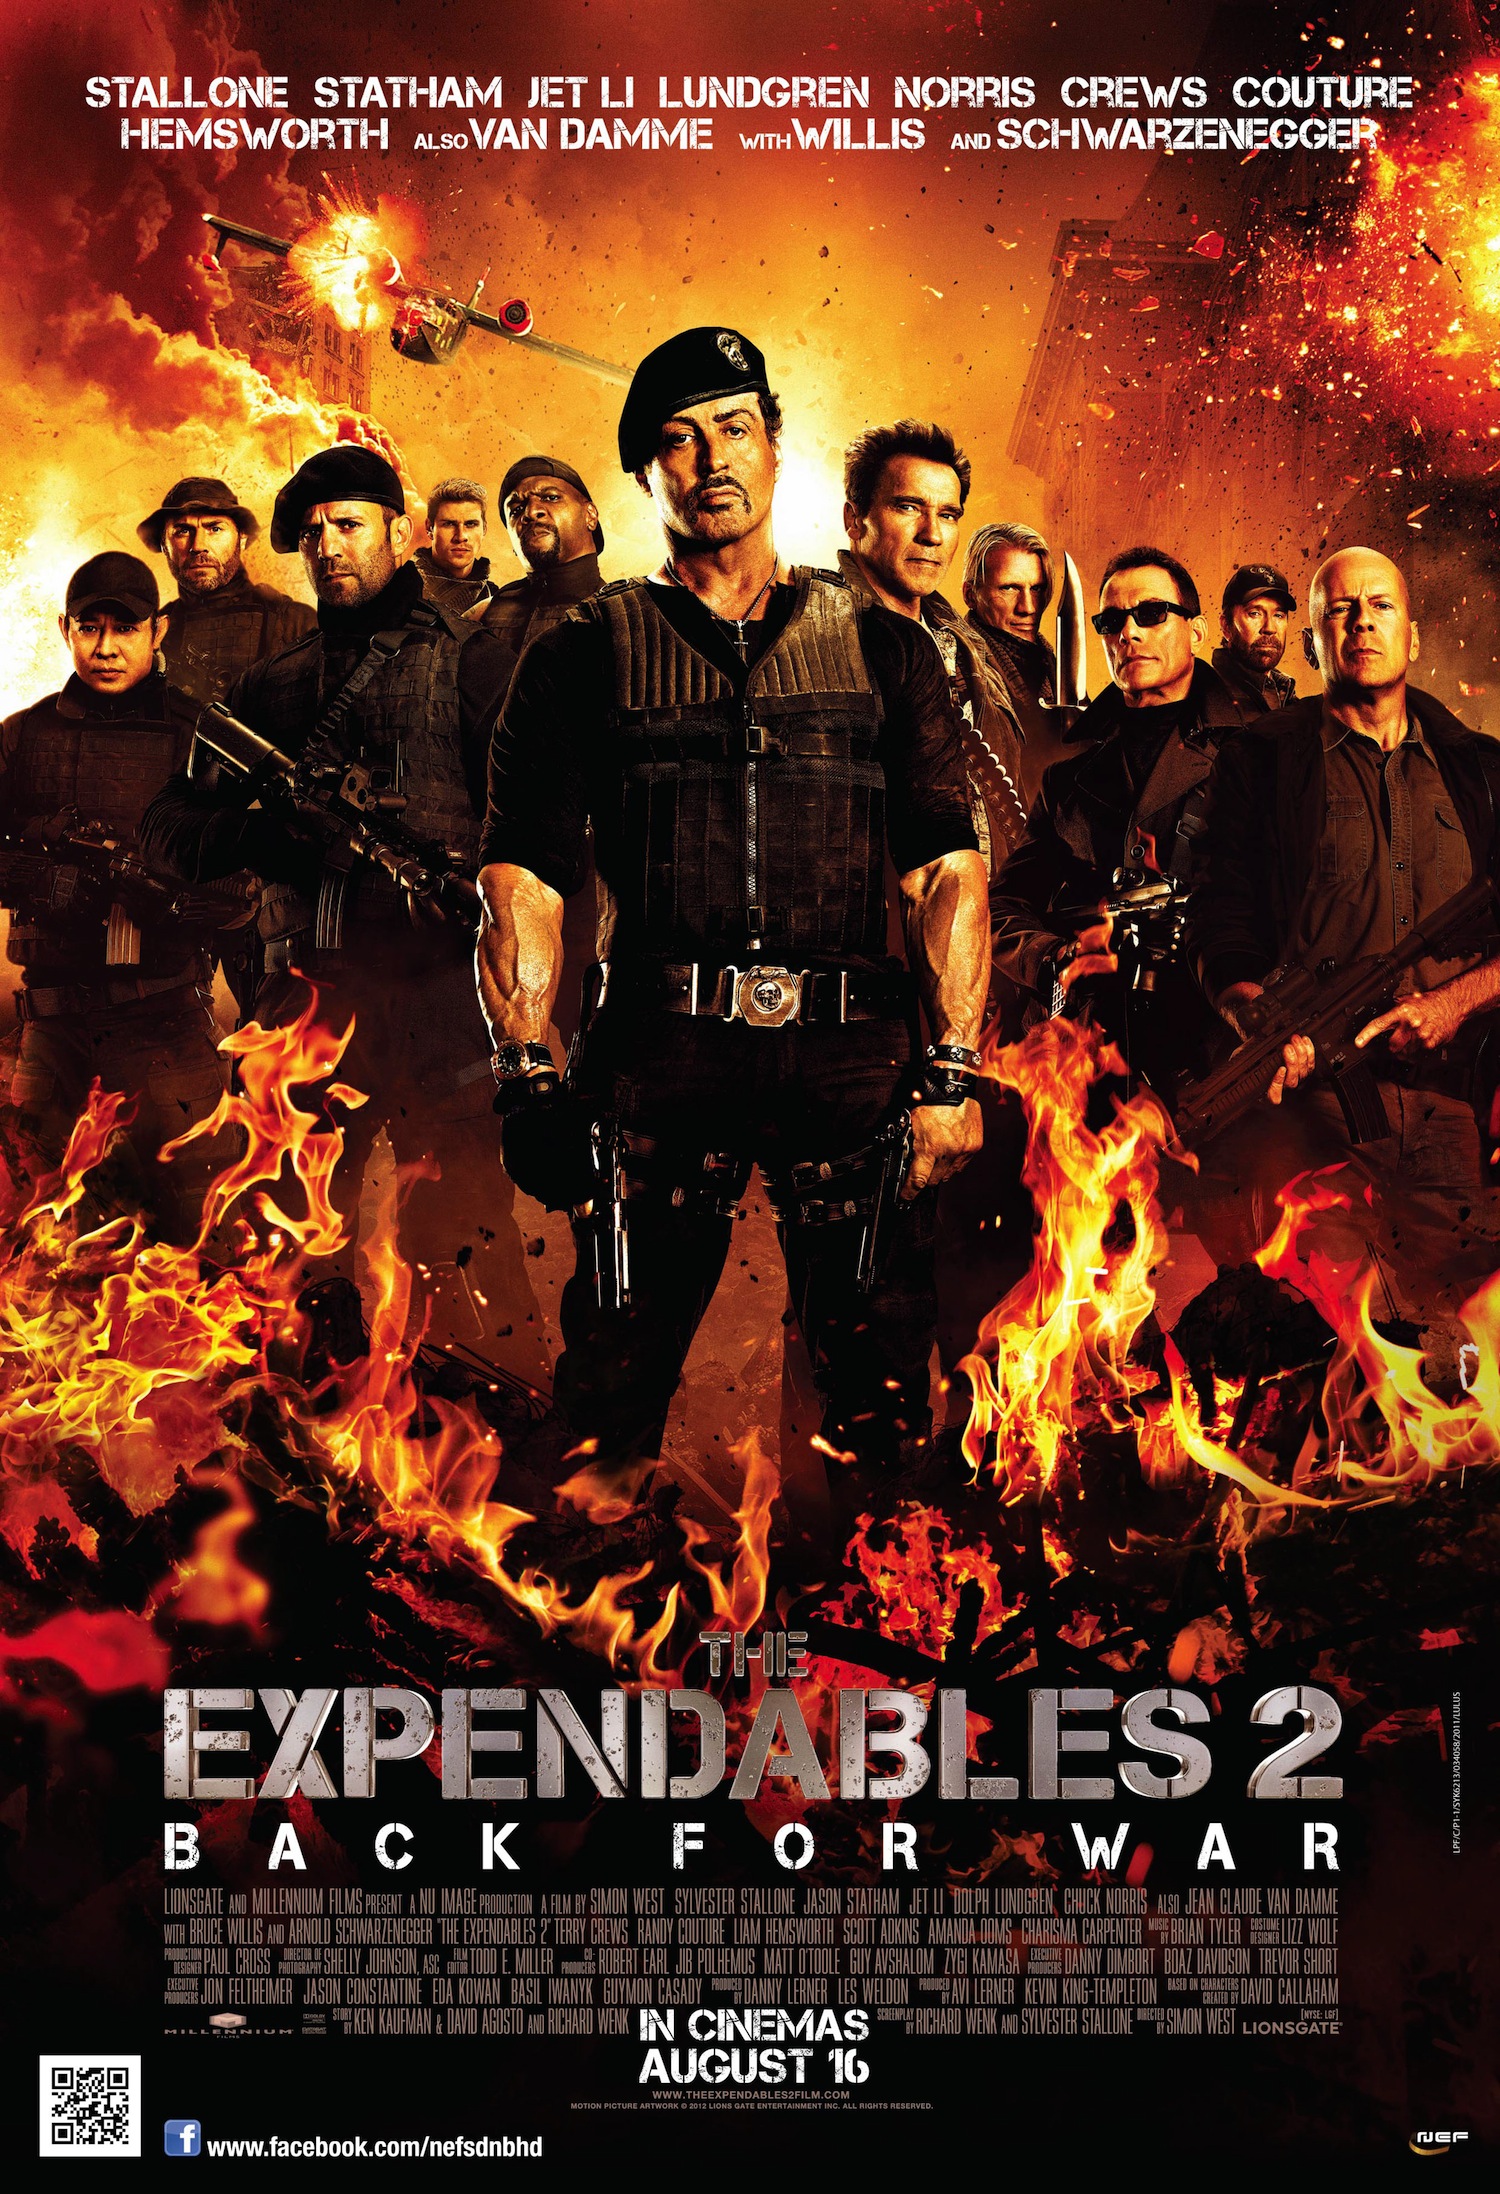 Win special passes to The Expendables 2 and cool merchandise with the Driven Movie Night contest!